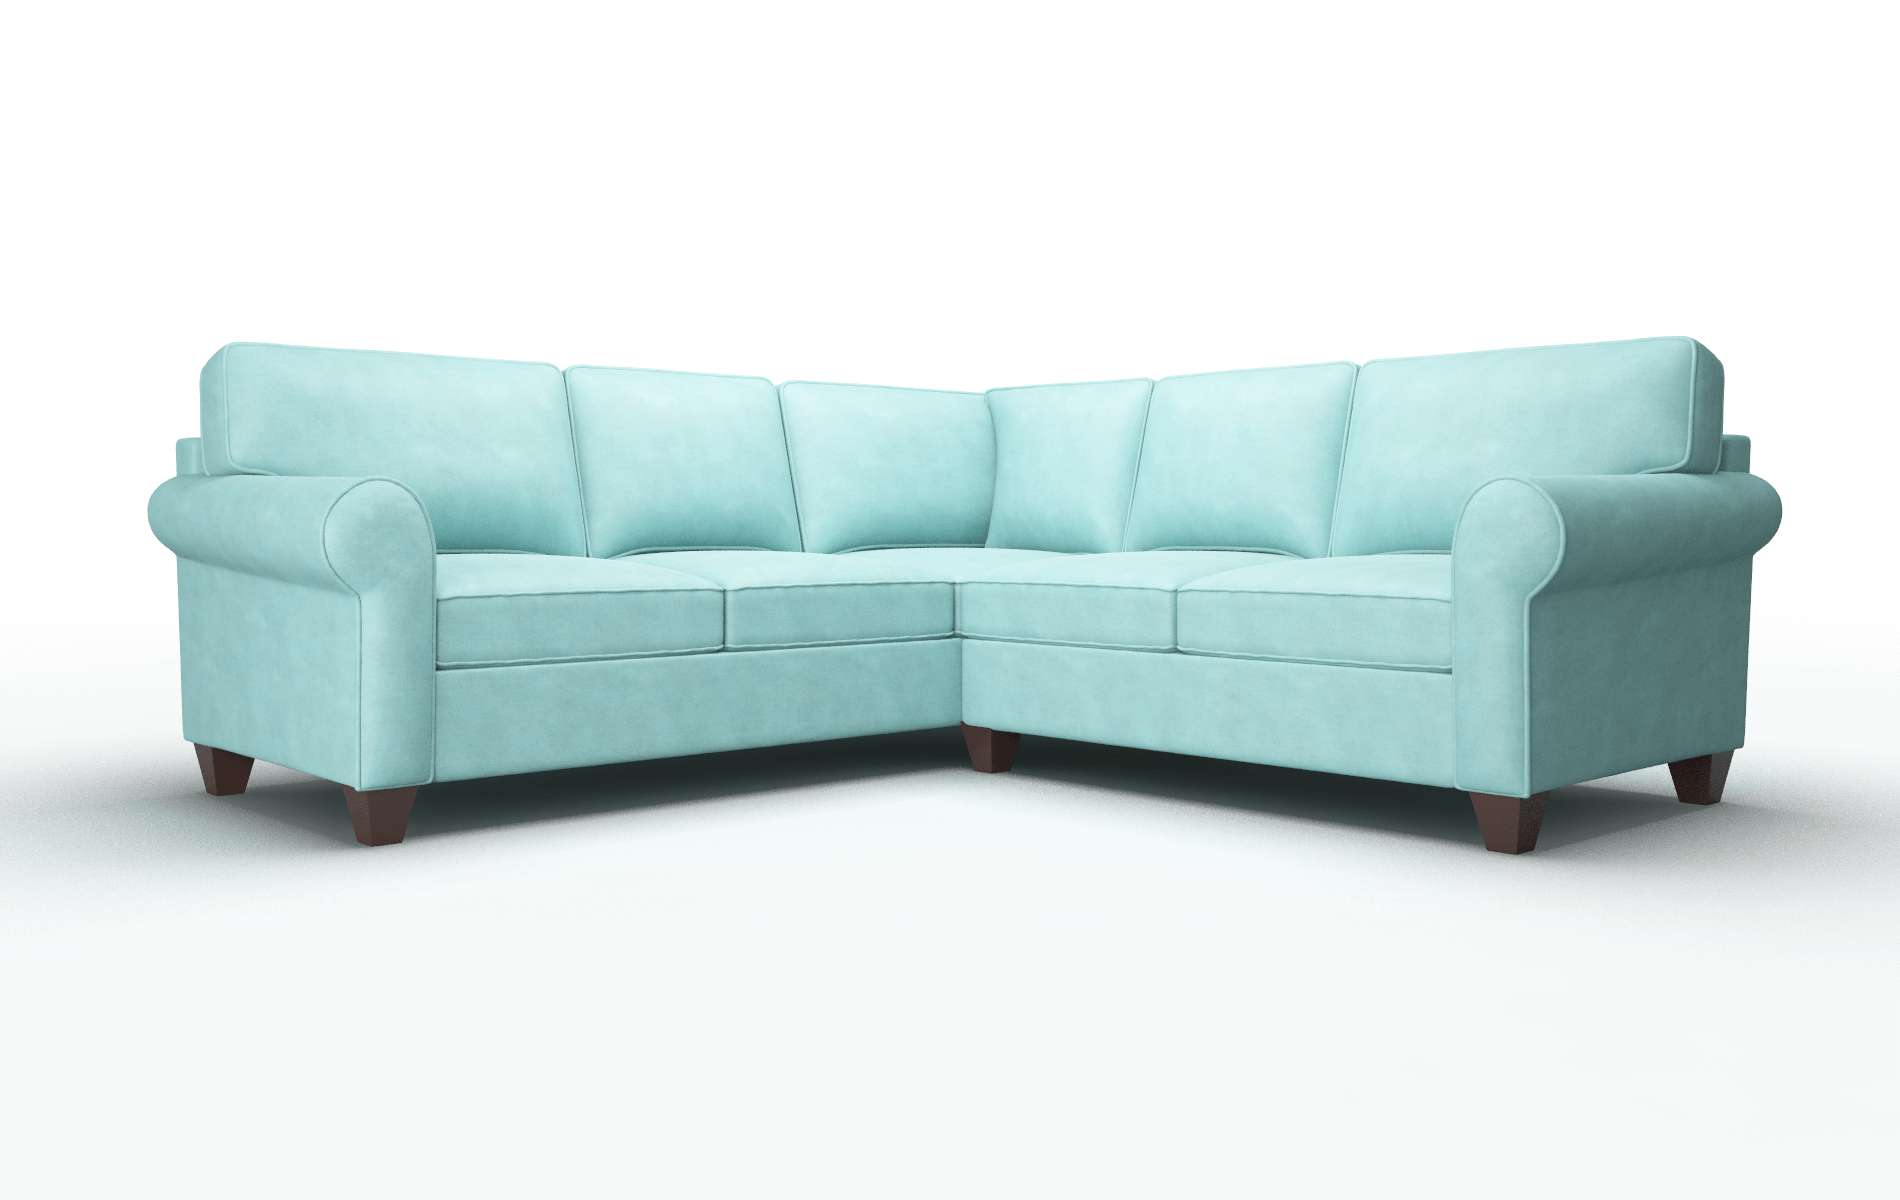 Augusta Curious Turquoise Sectional espresso legs 1